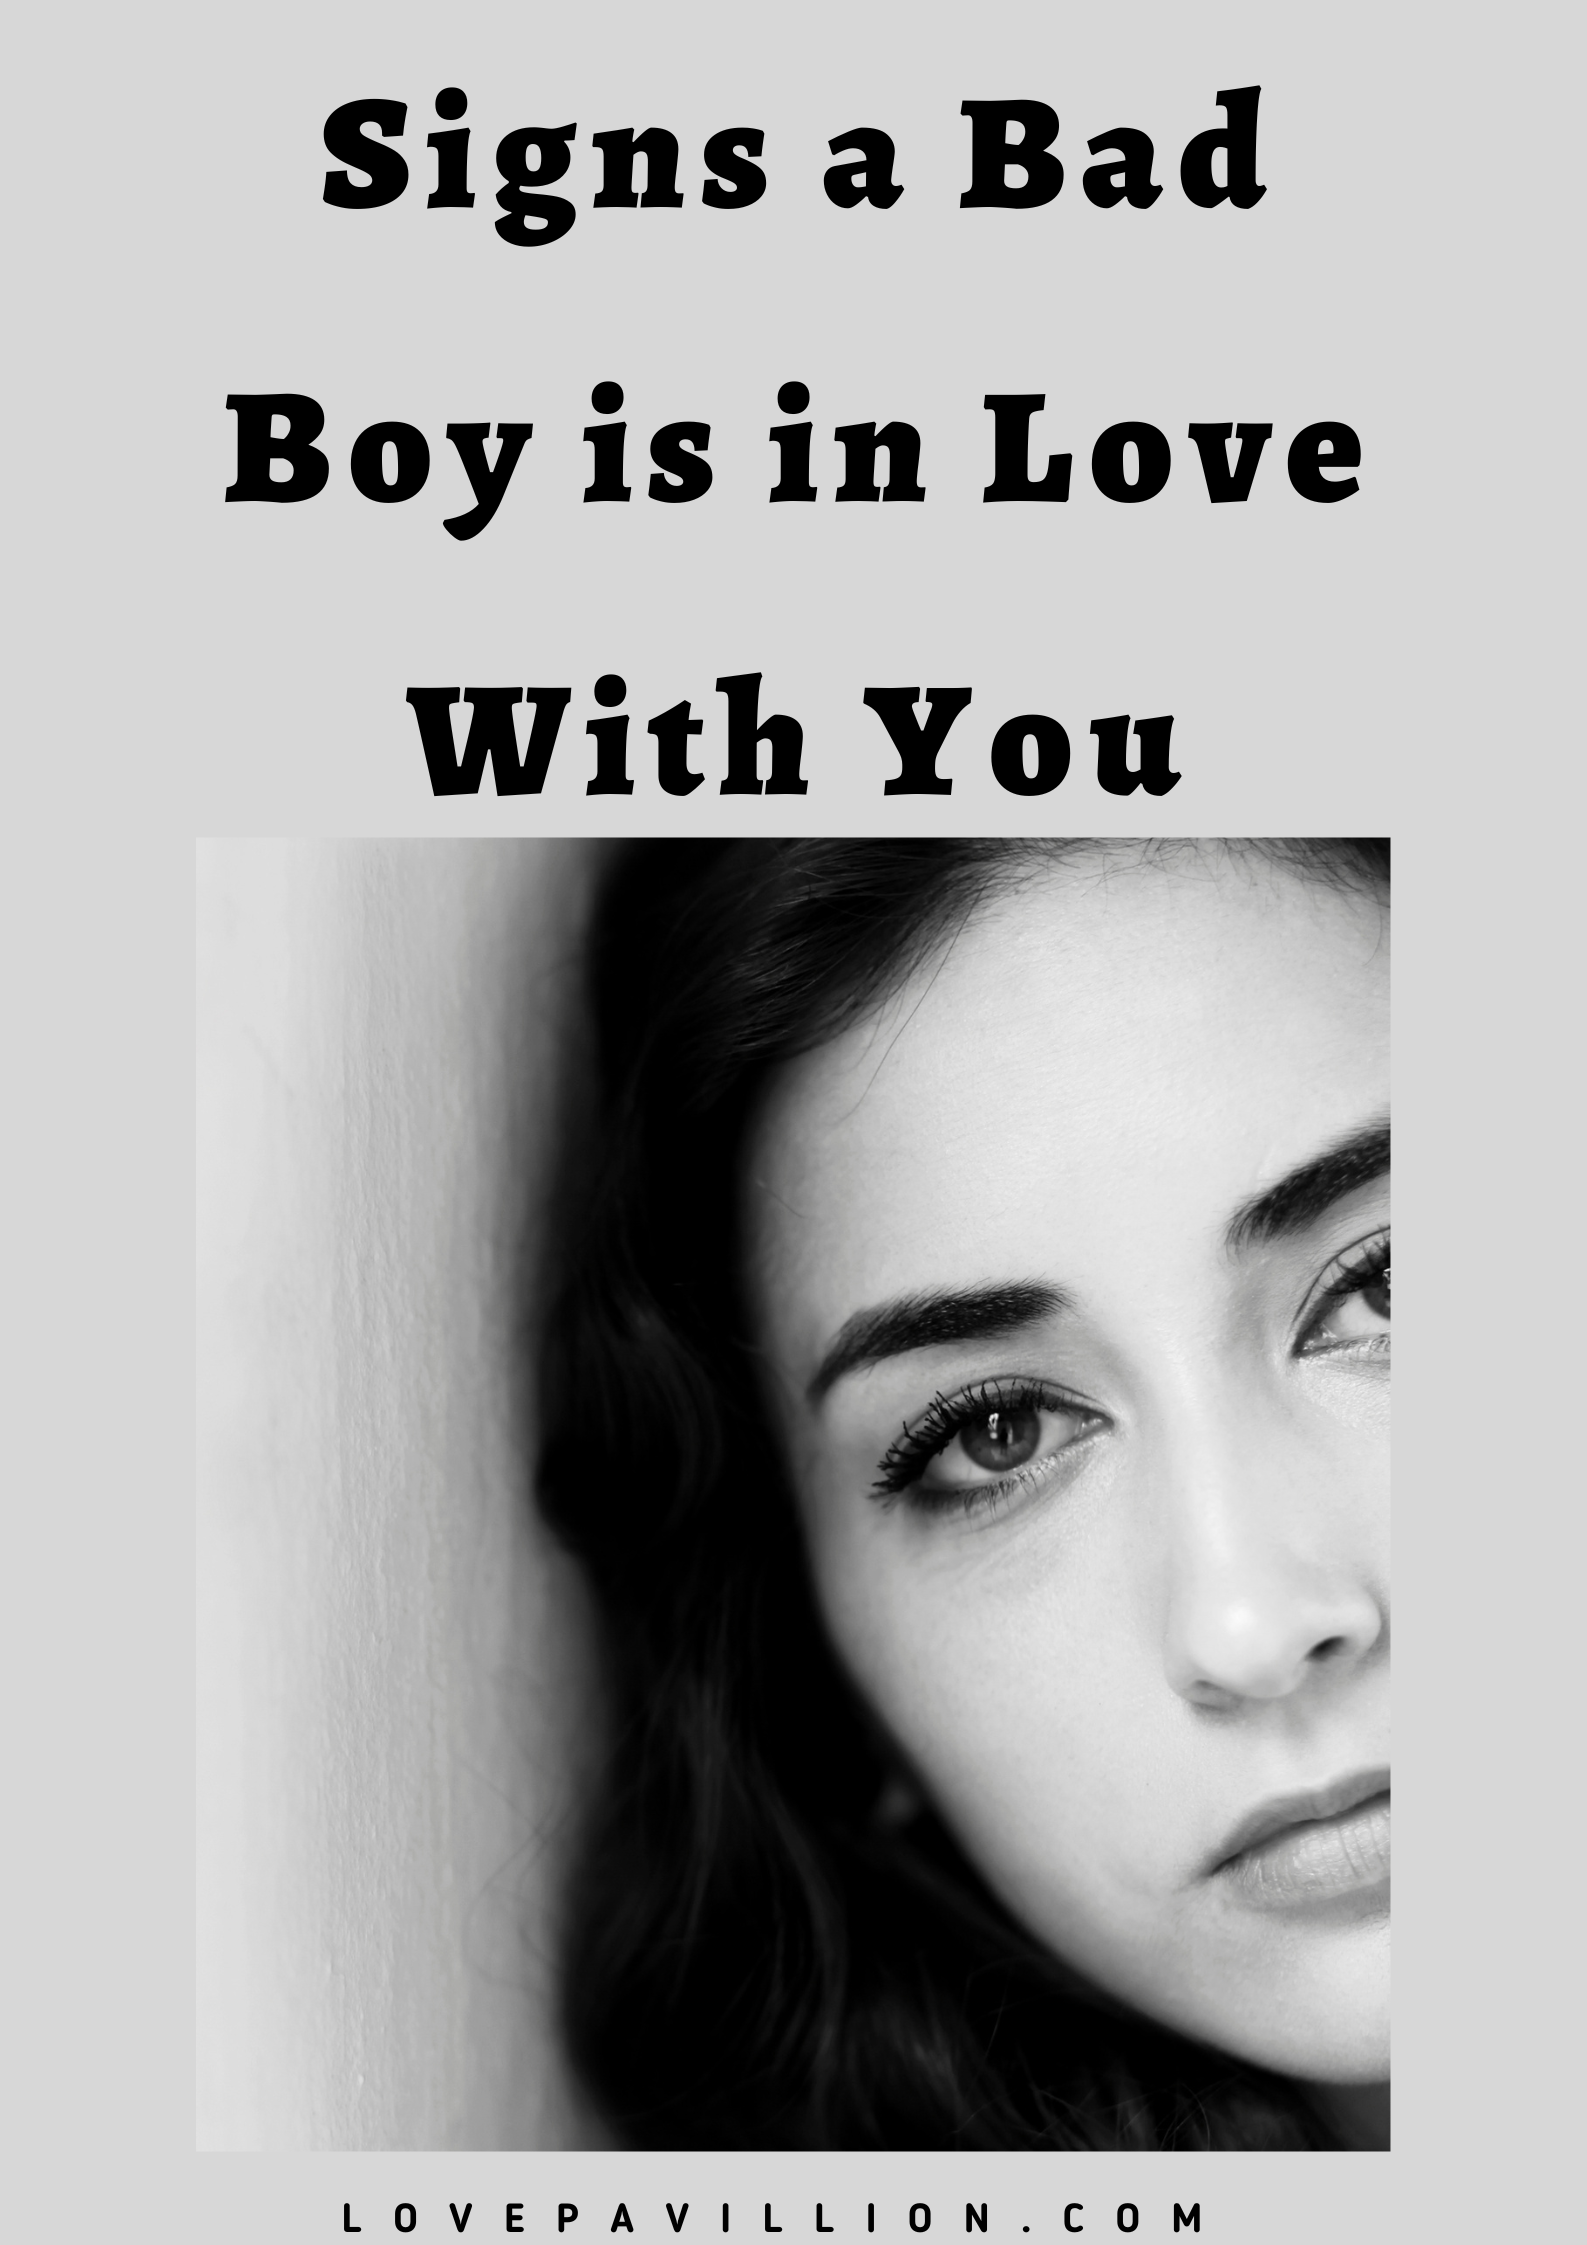 Signs a Bad Boy is in Love With You